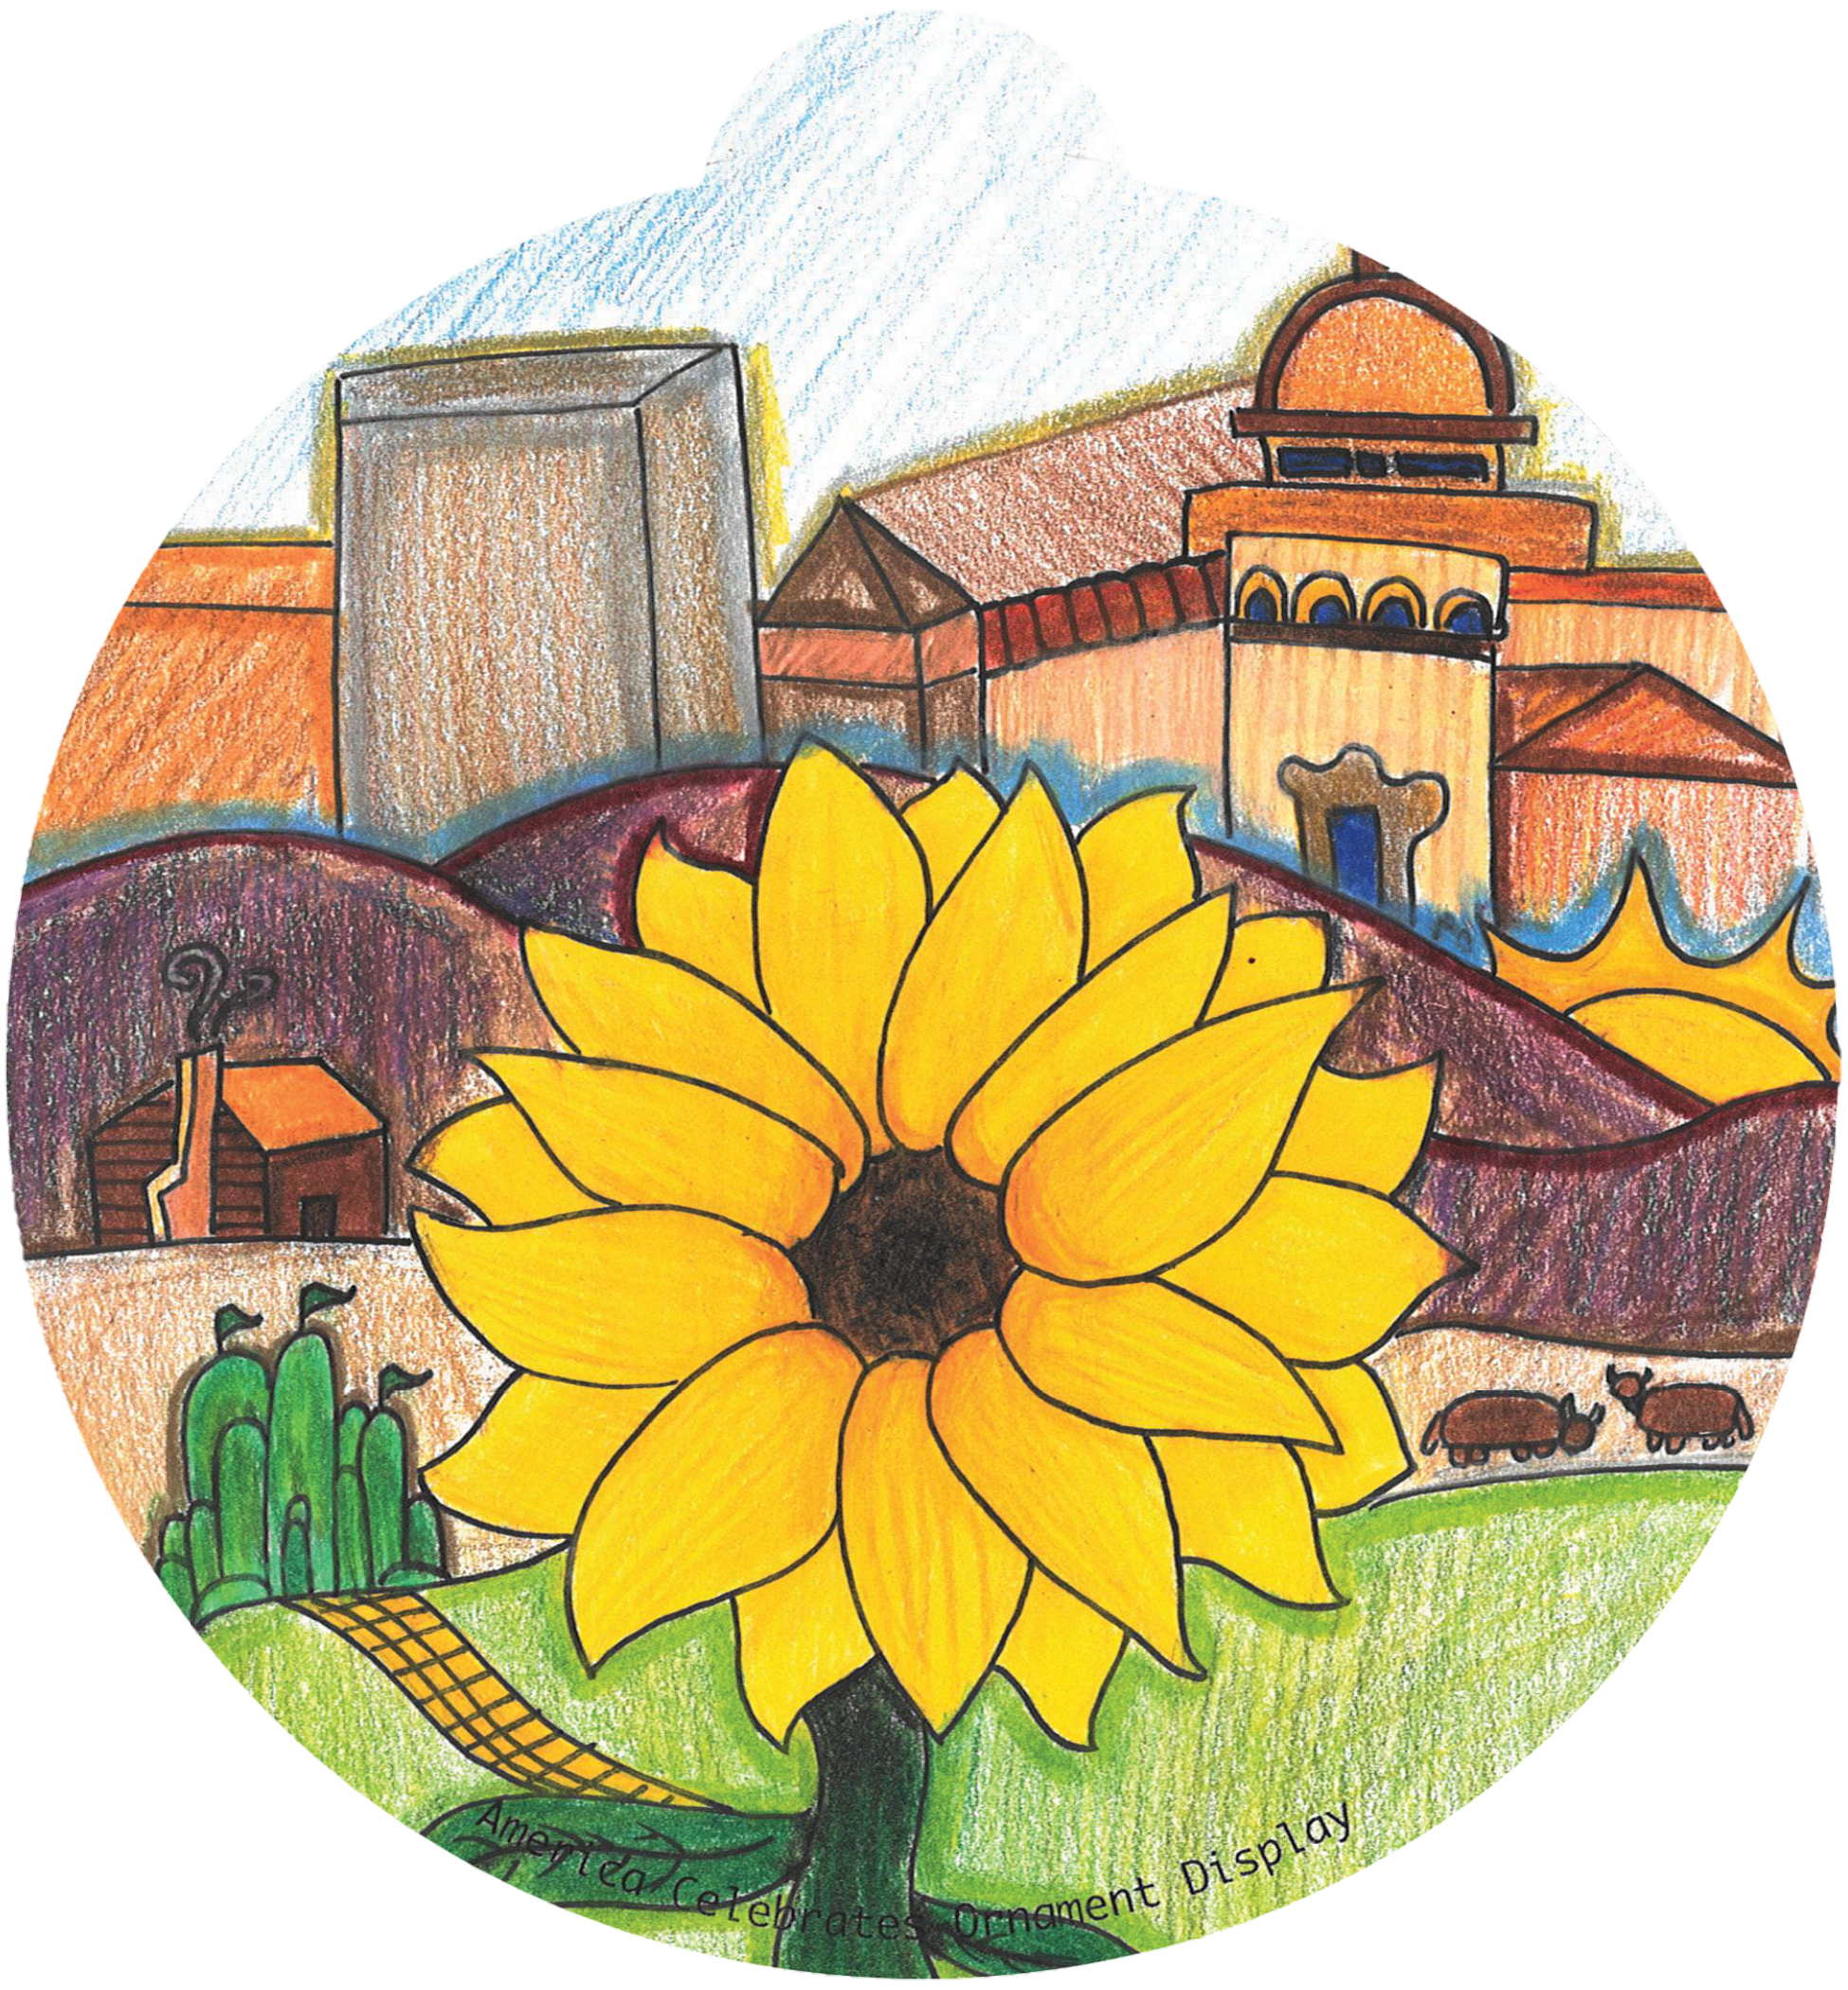 ornament depicting a sunflower, mountains, a sunrise, and various types of architecture